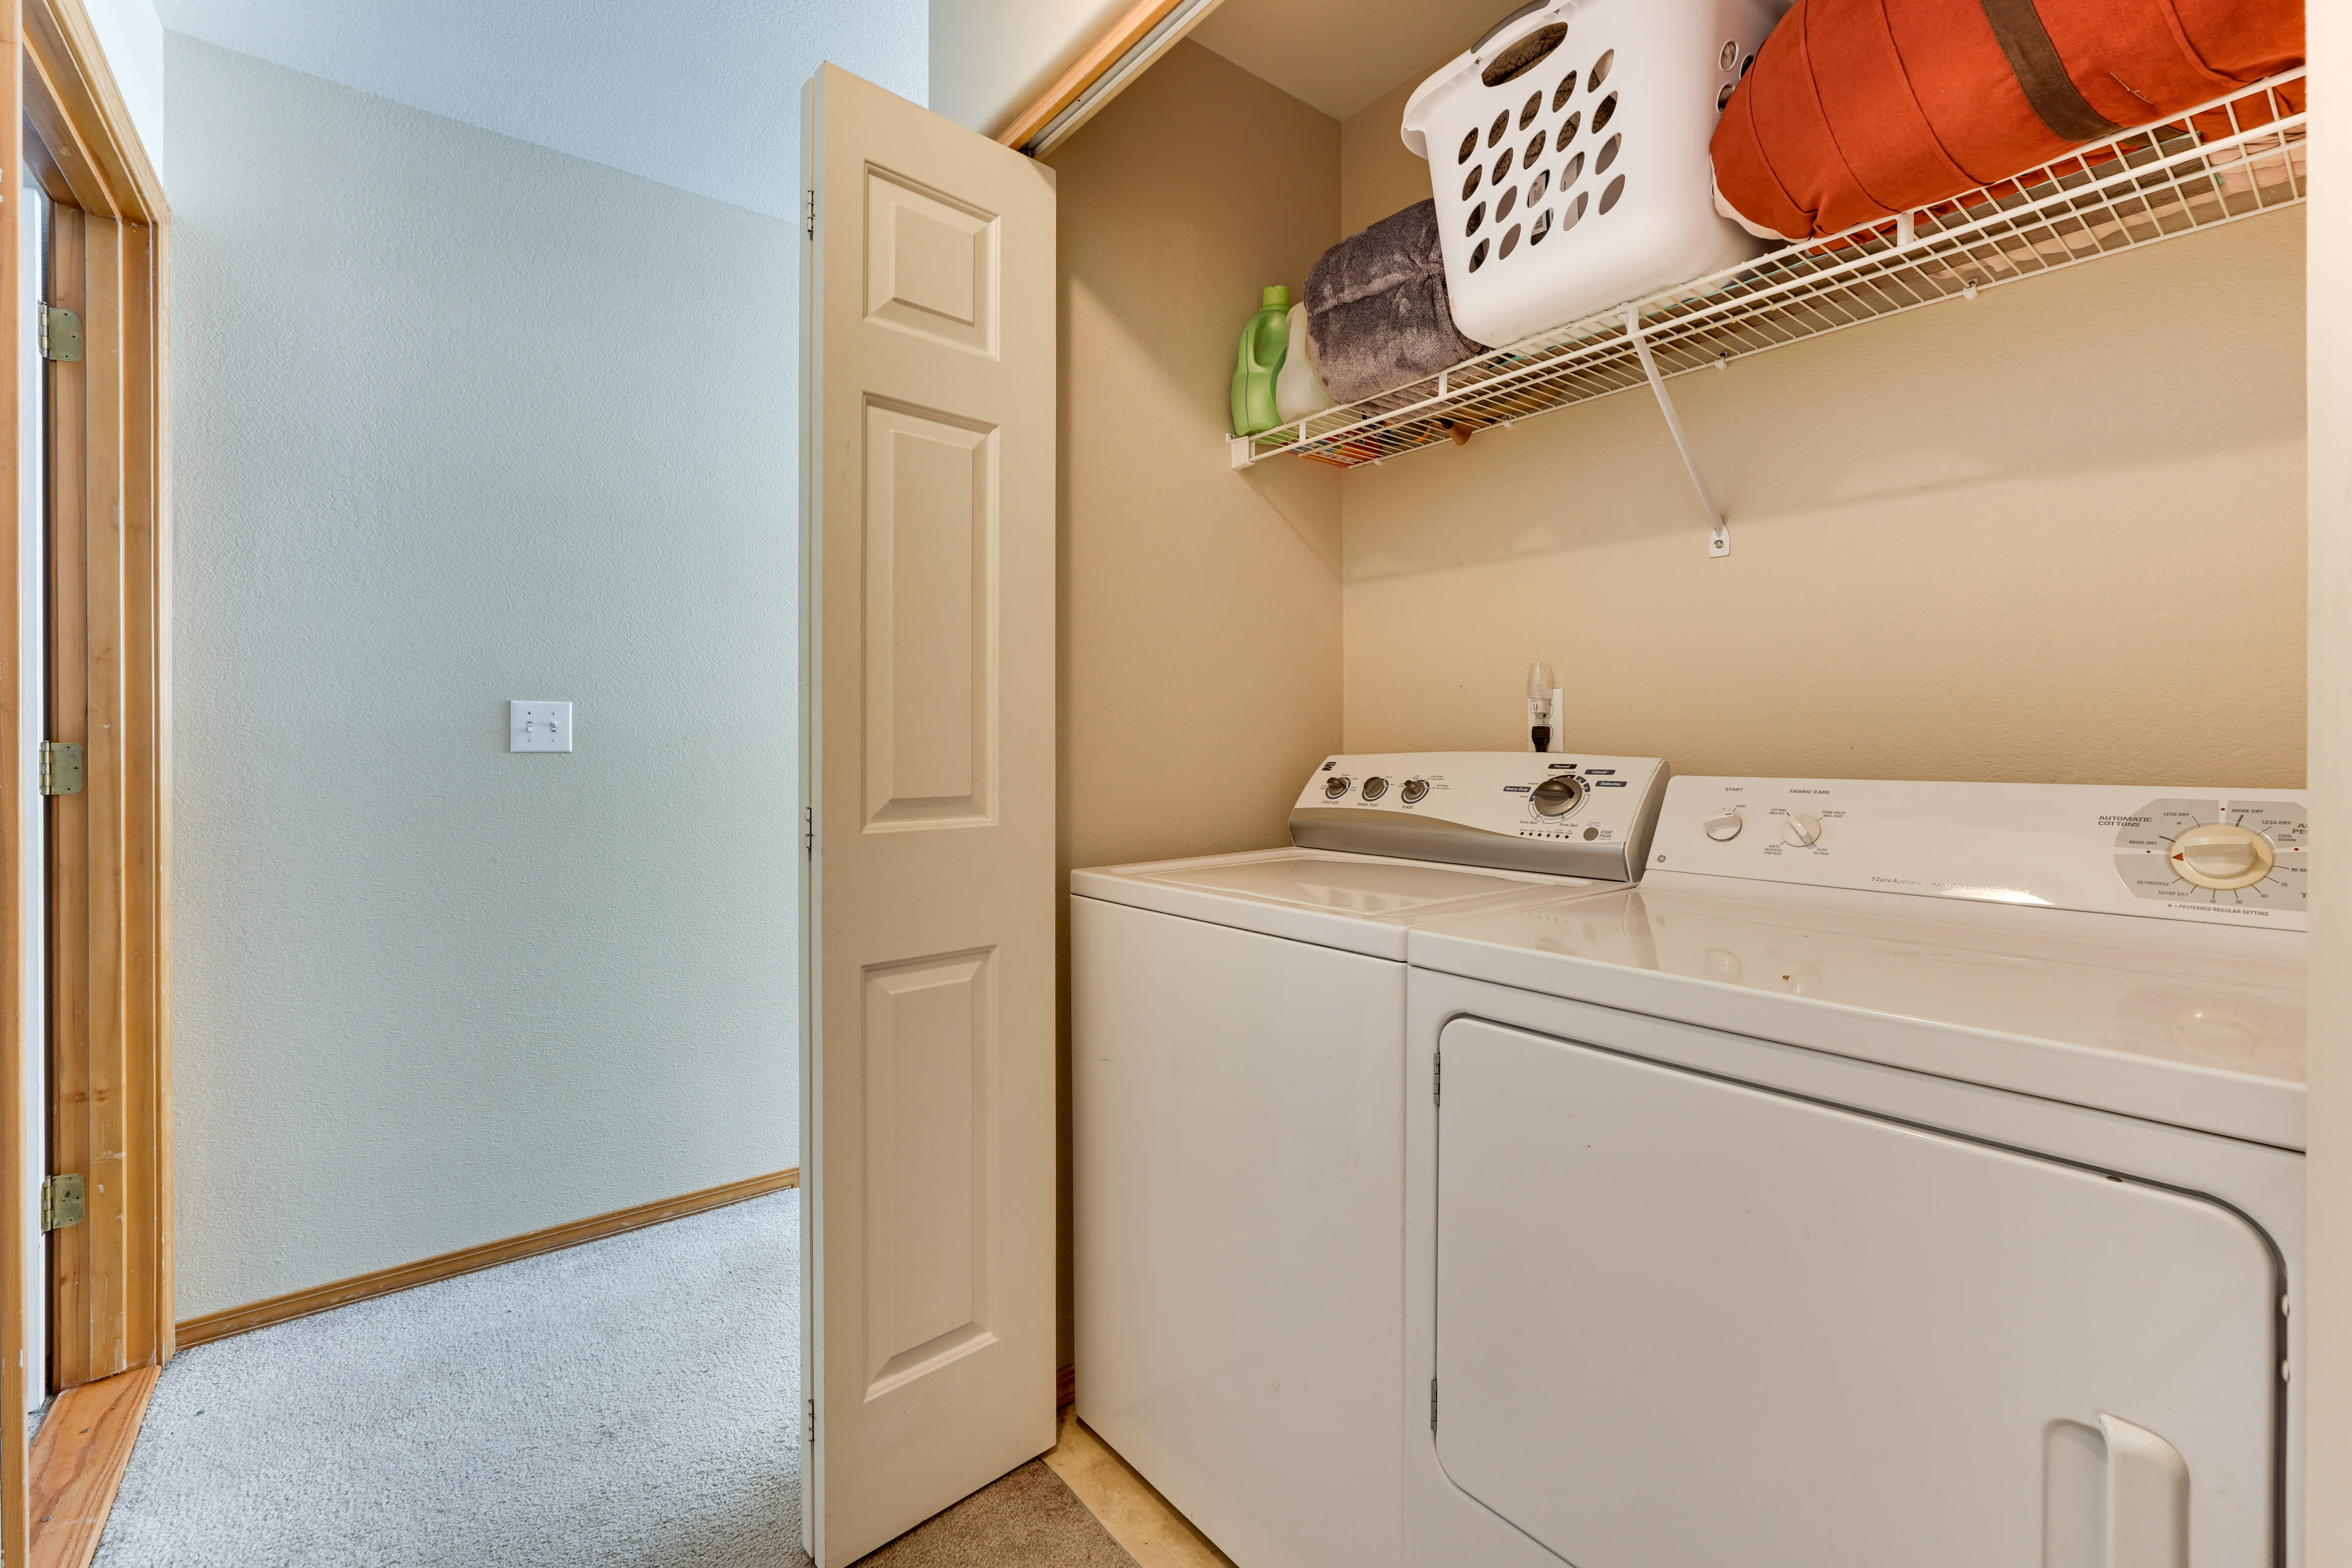 Laundry Area | 2nd Floor | Washer/Dryer | Laundry Detergent | Iron/Board